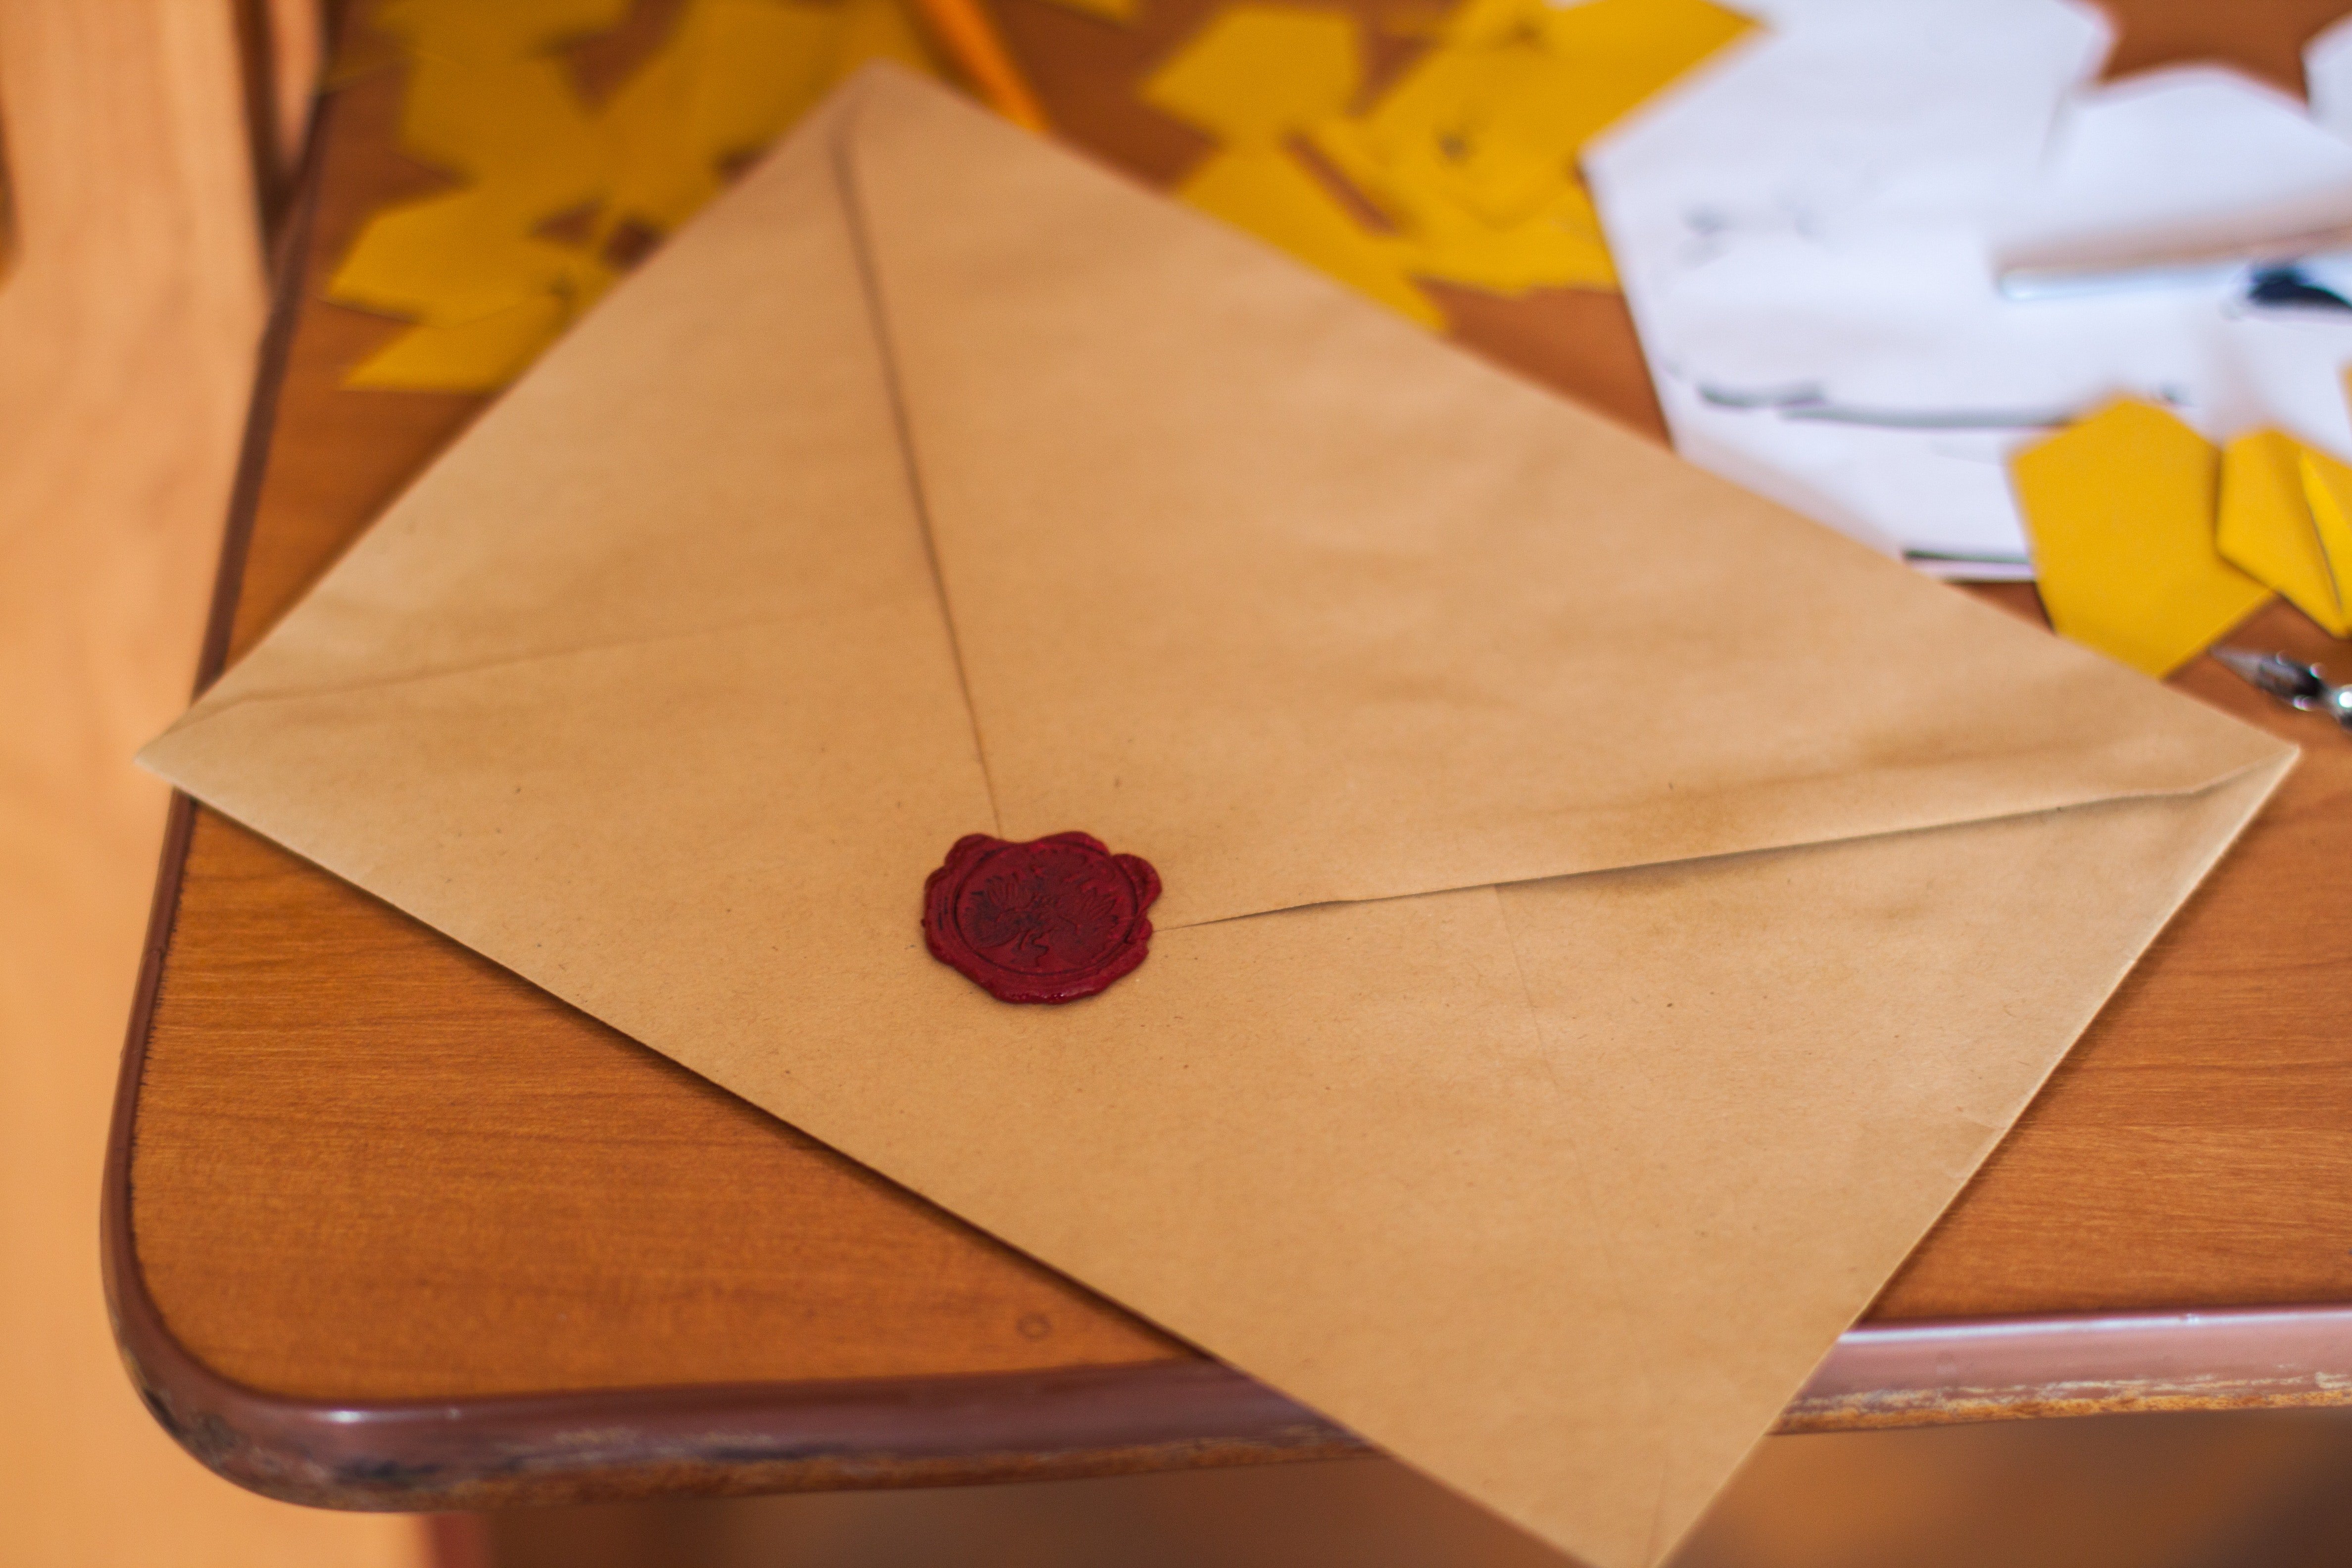 A mail enclosed in an envelope. | Source: Pexels